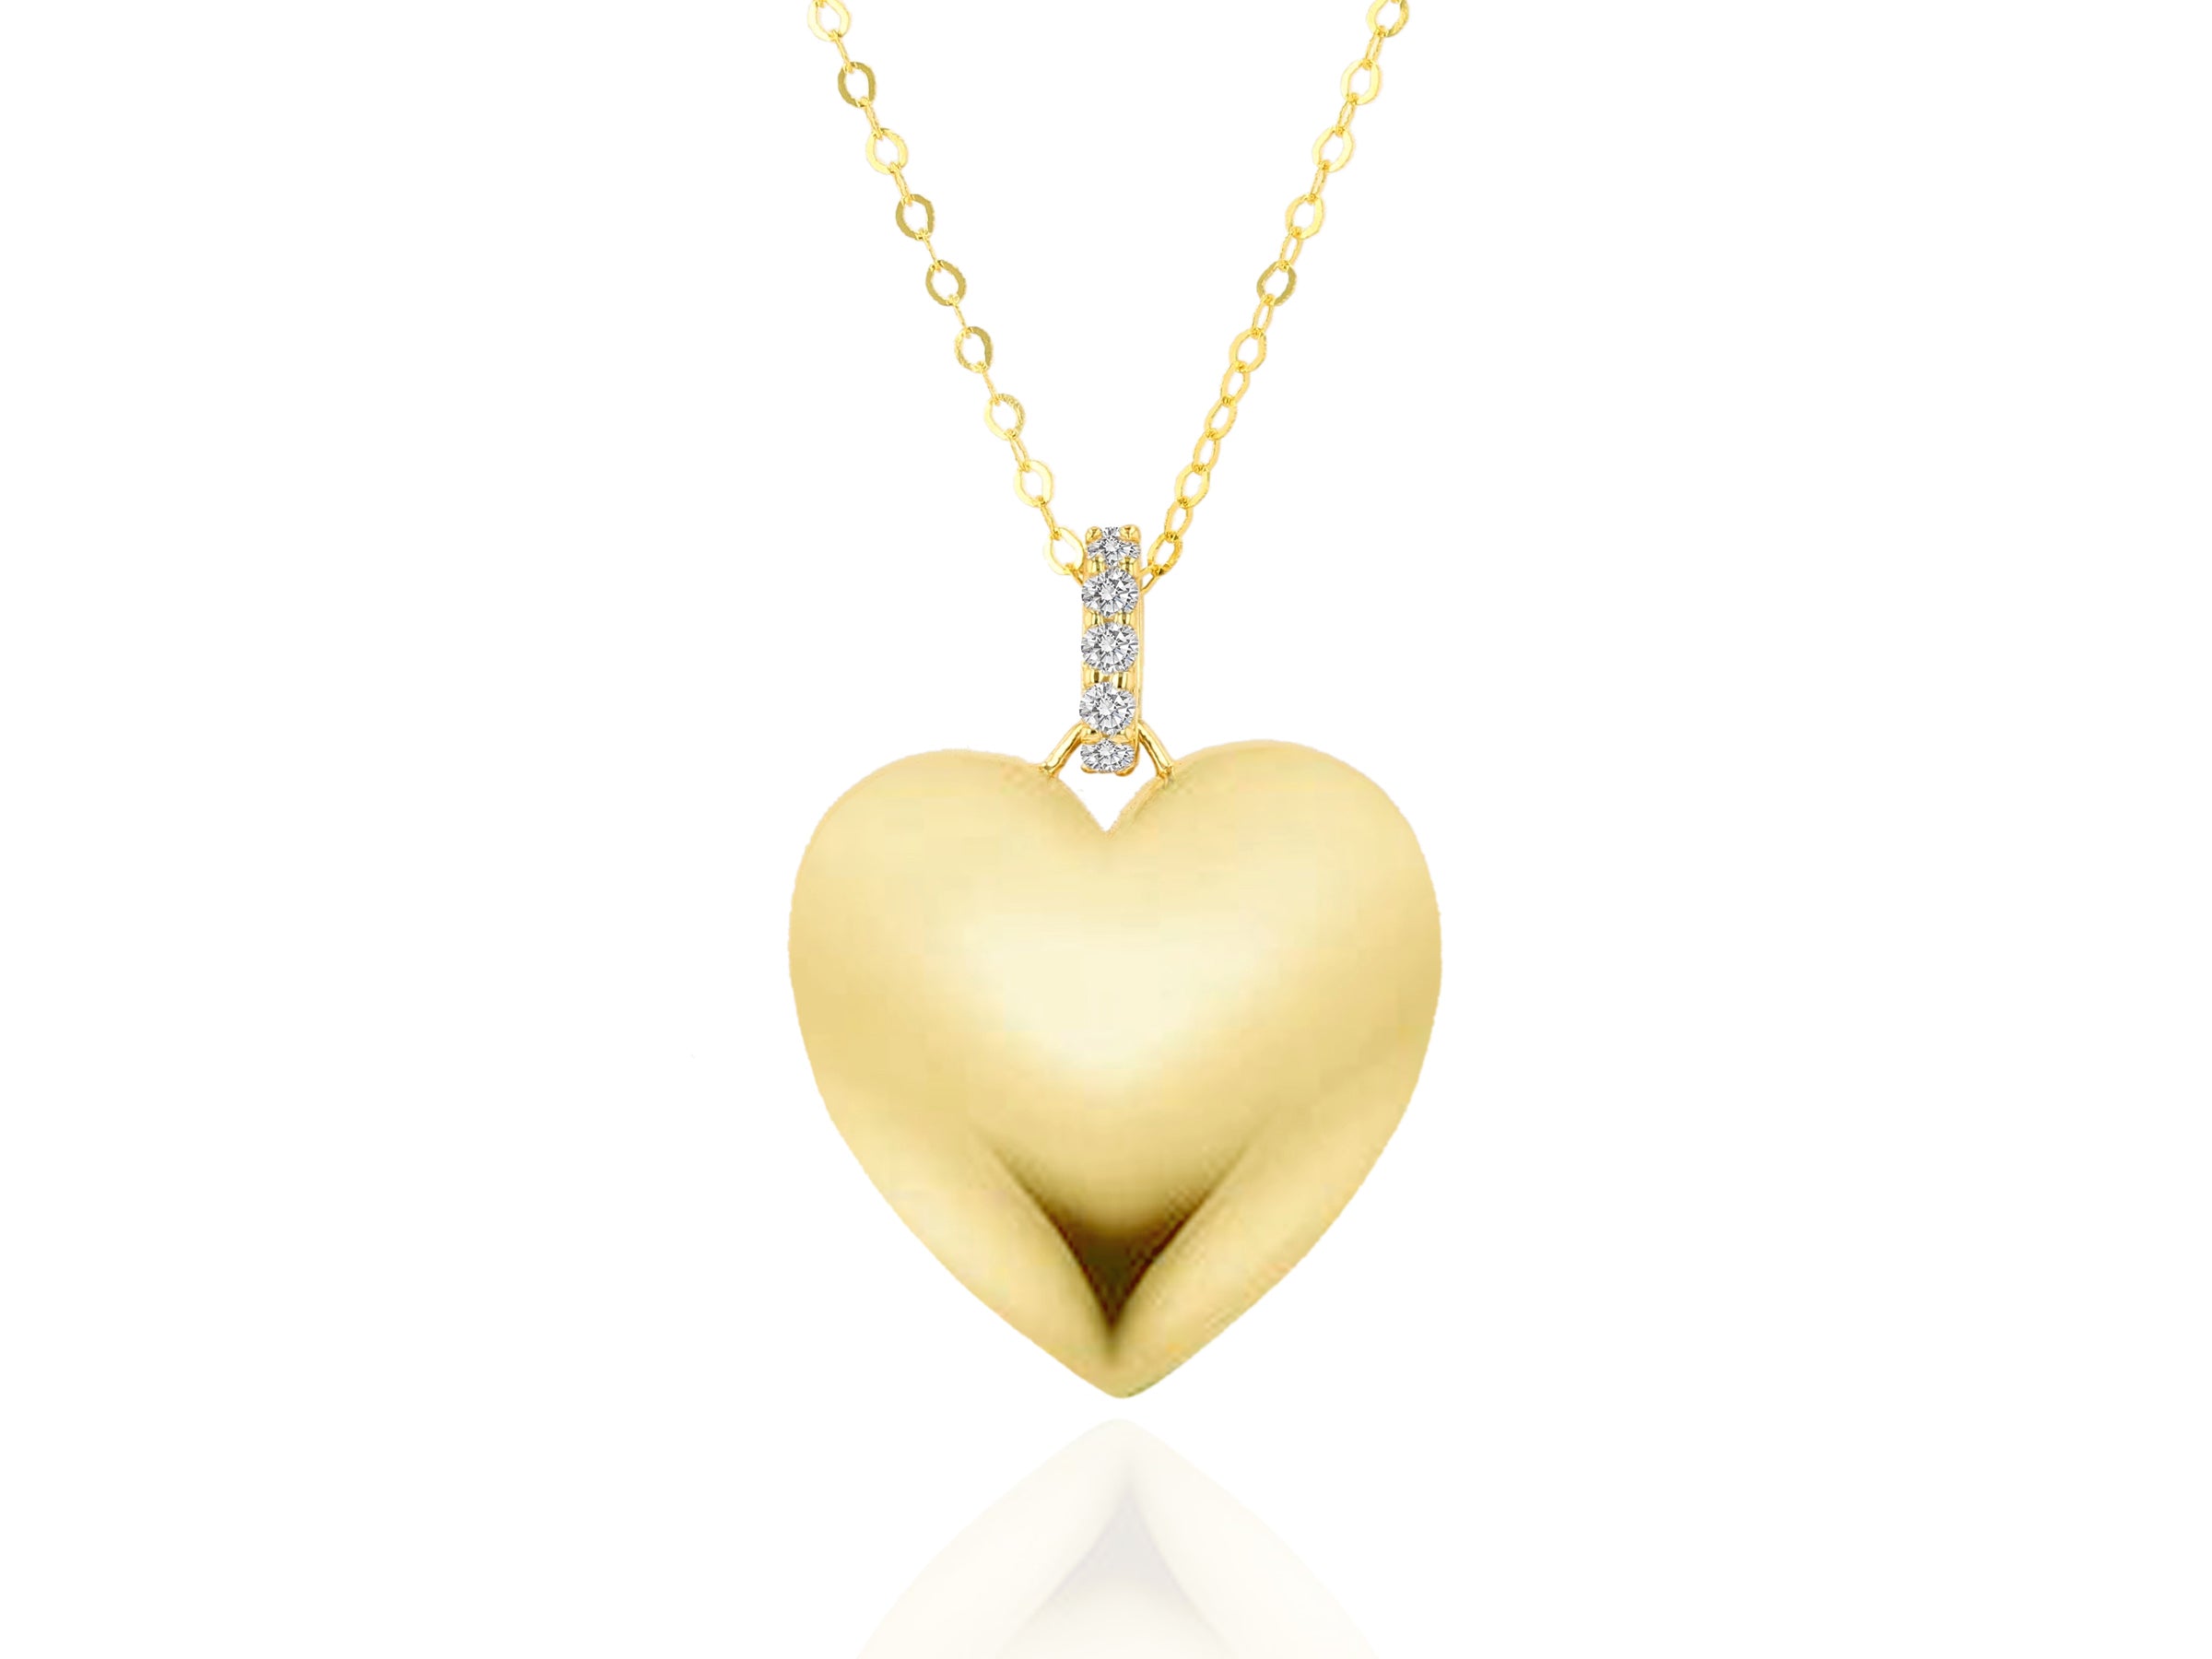 Oversized Puffy Gold Heart Charm